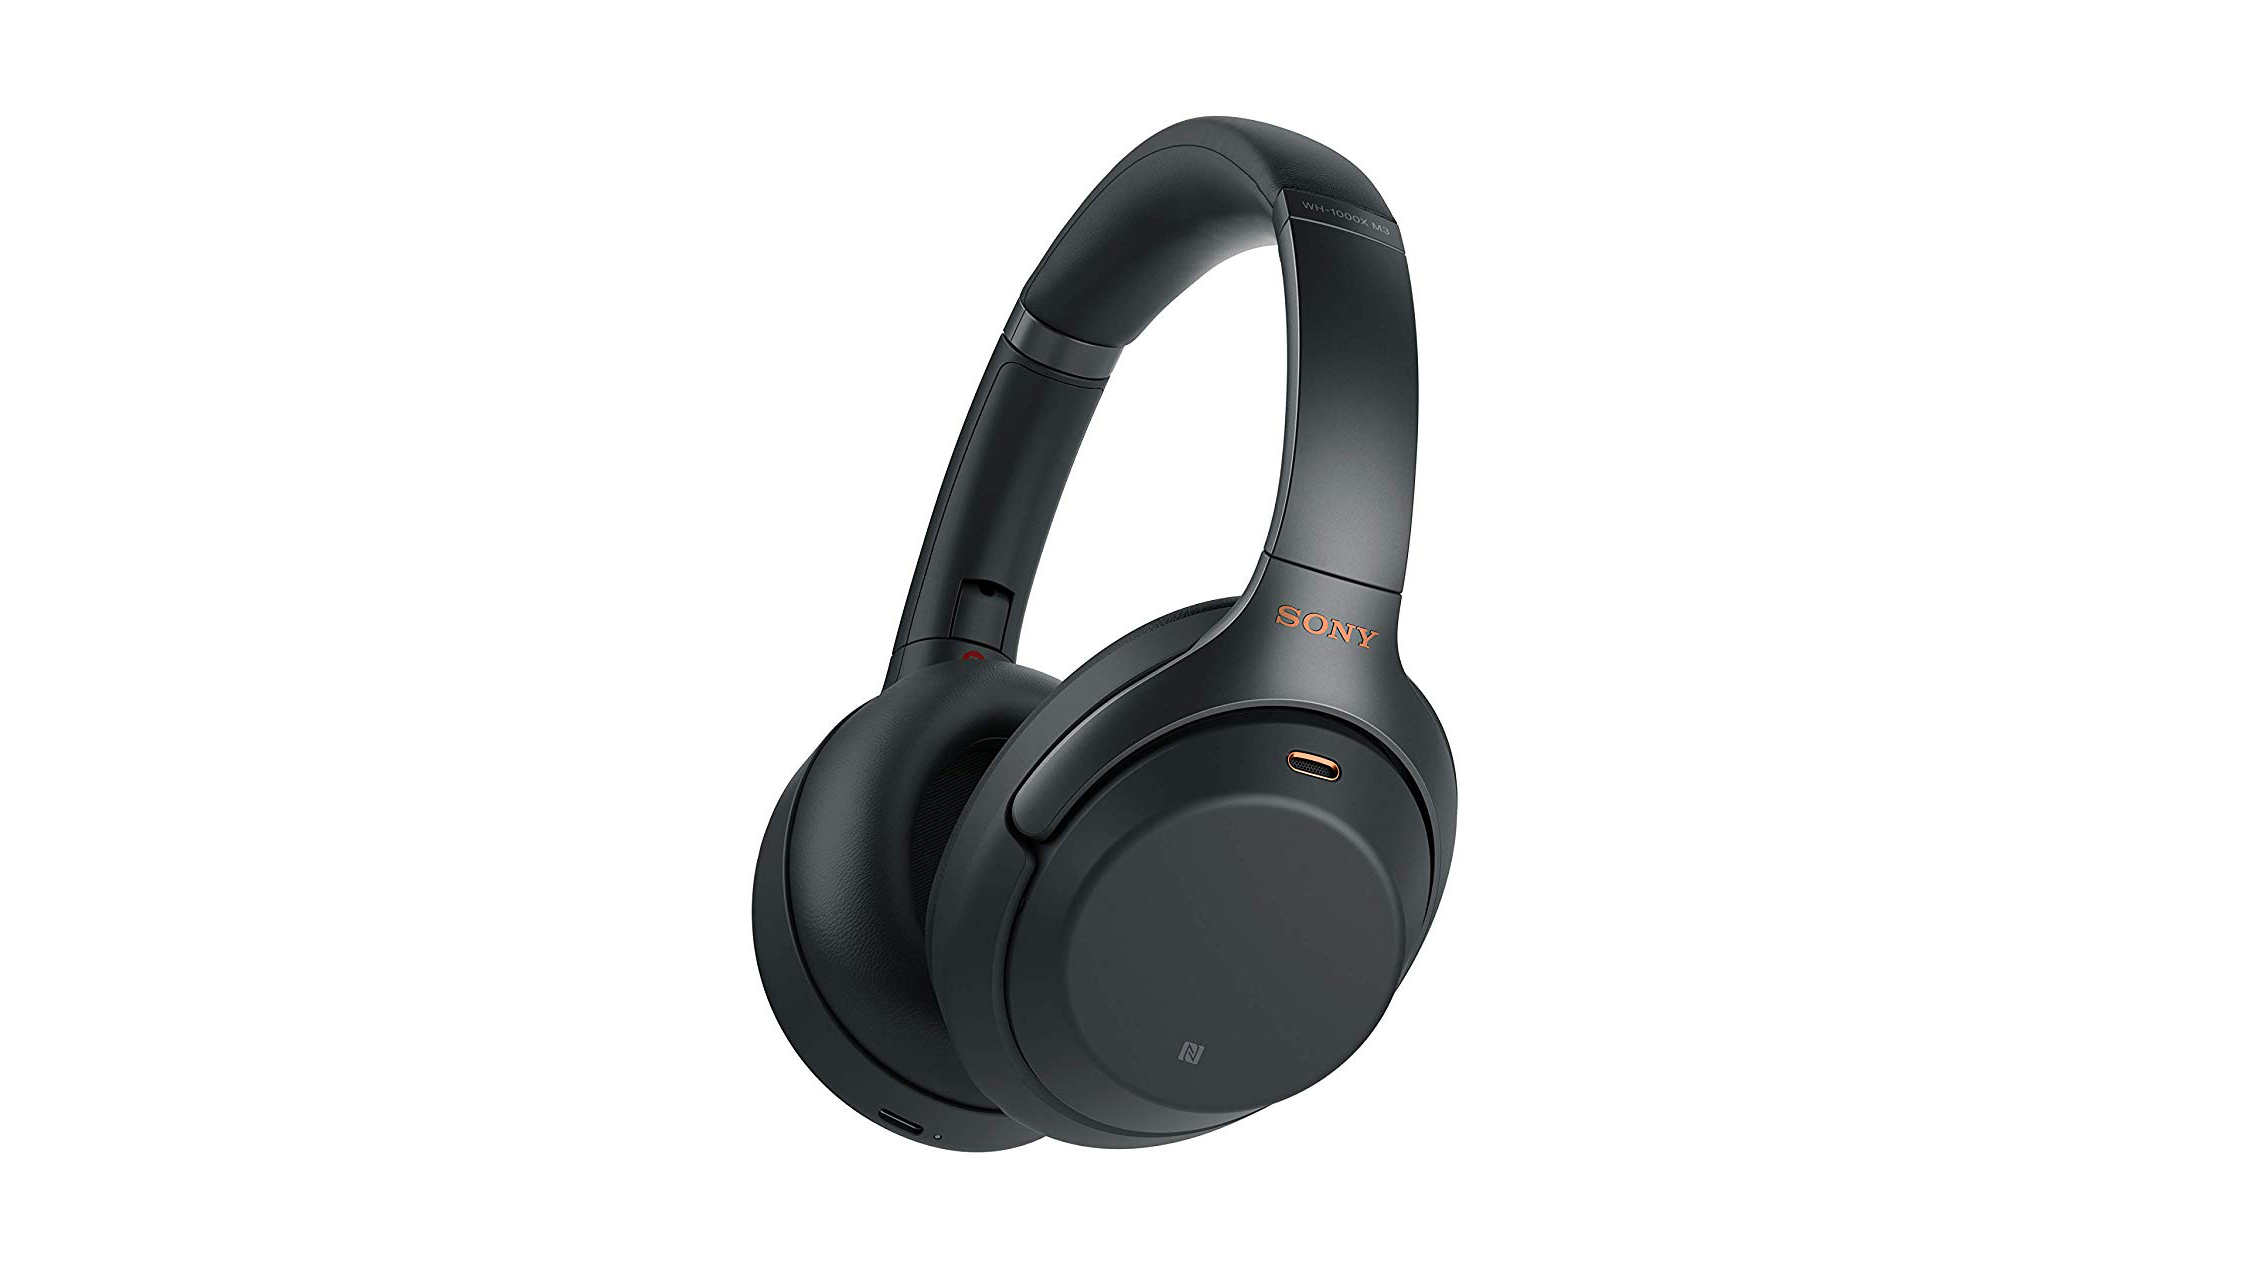 The best Amazon Prime Day headphone deals what to look out for from